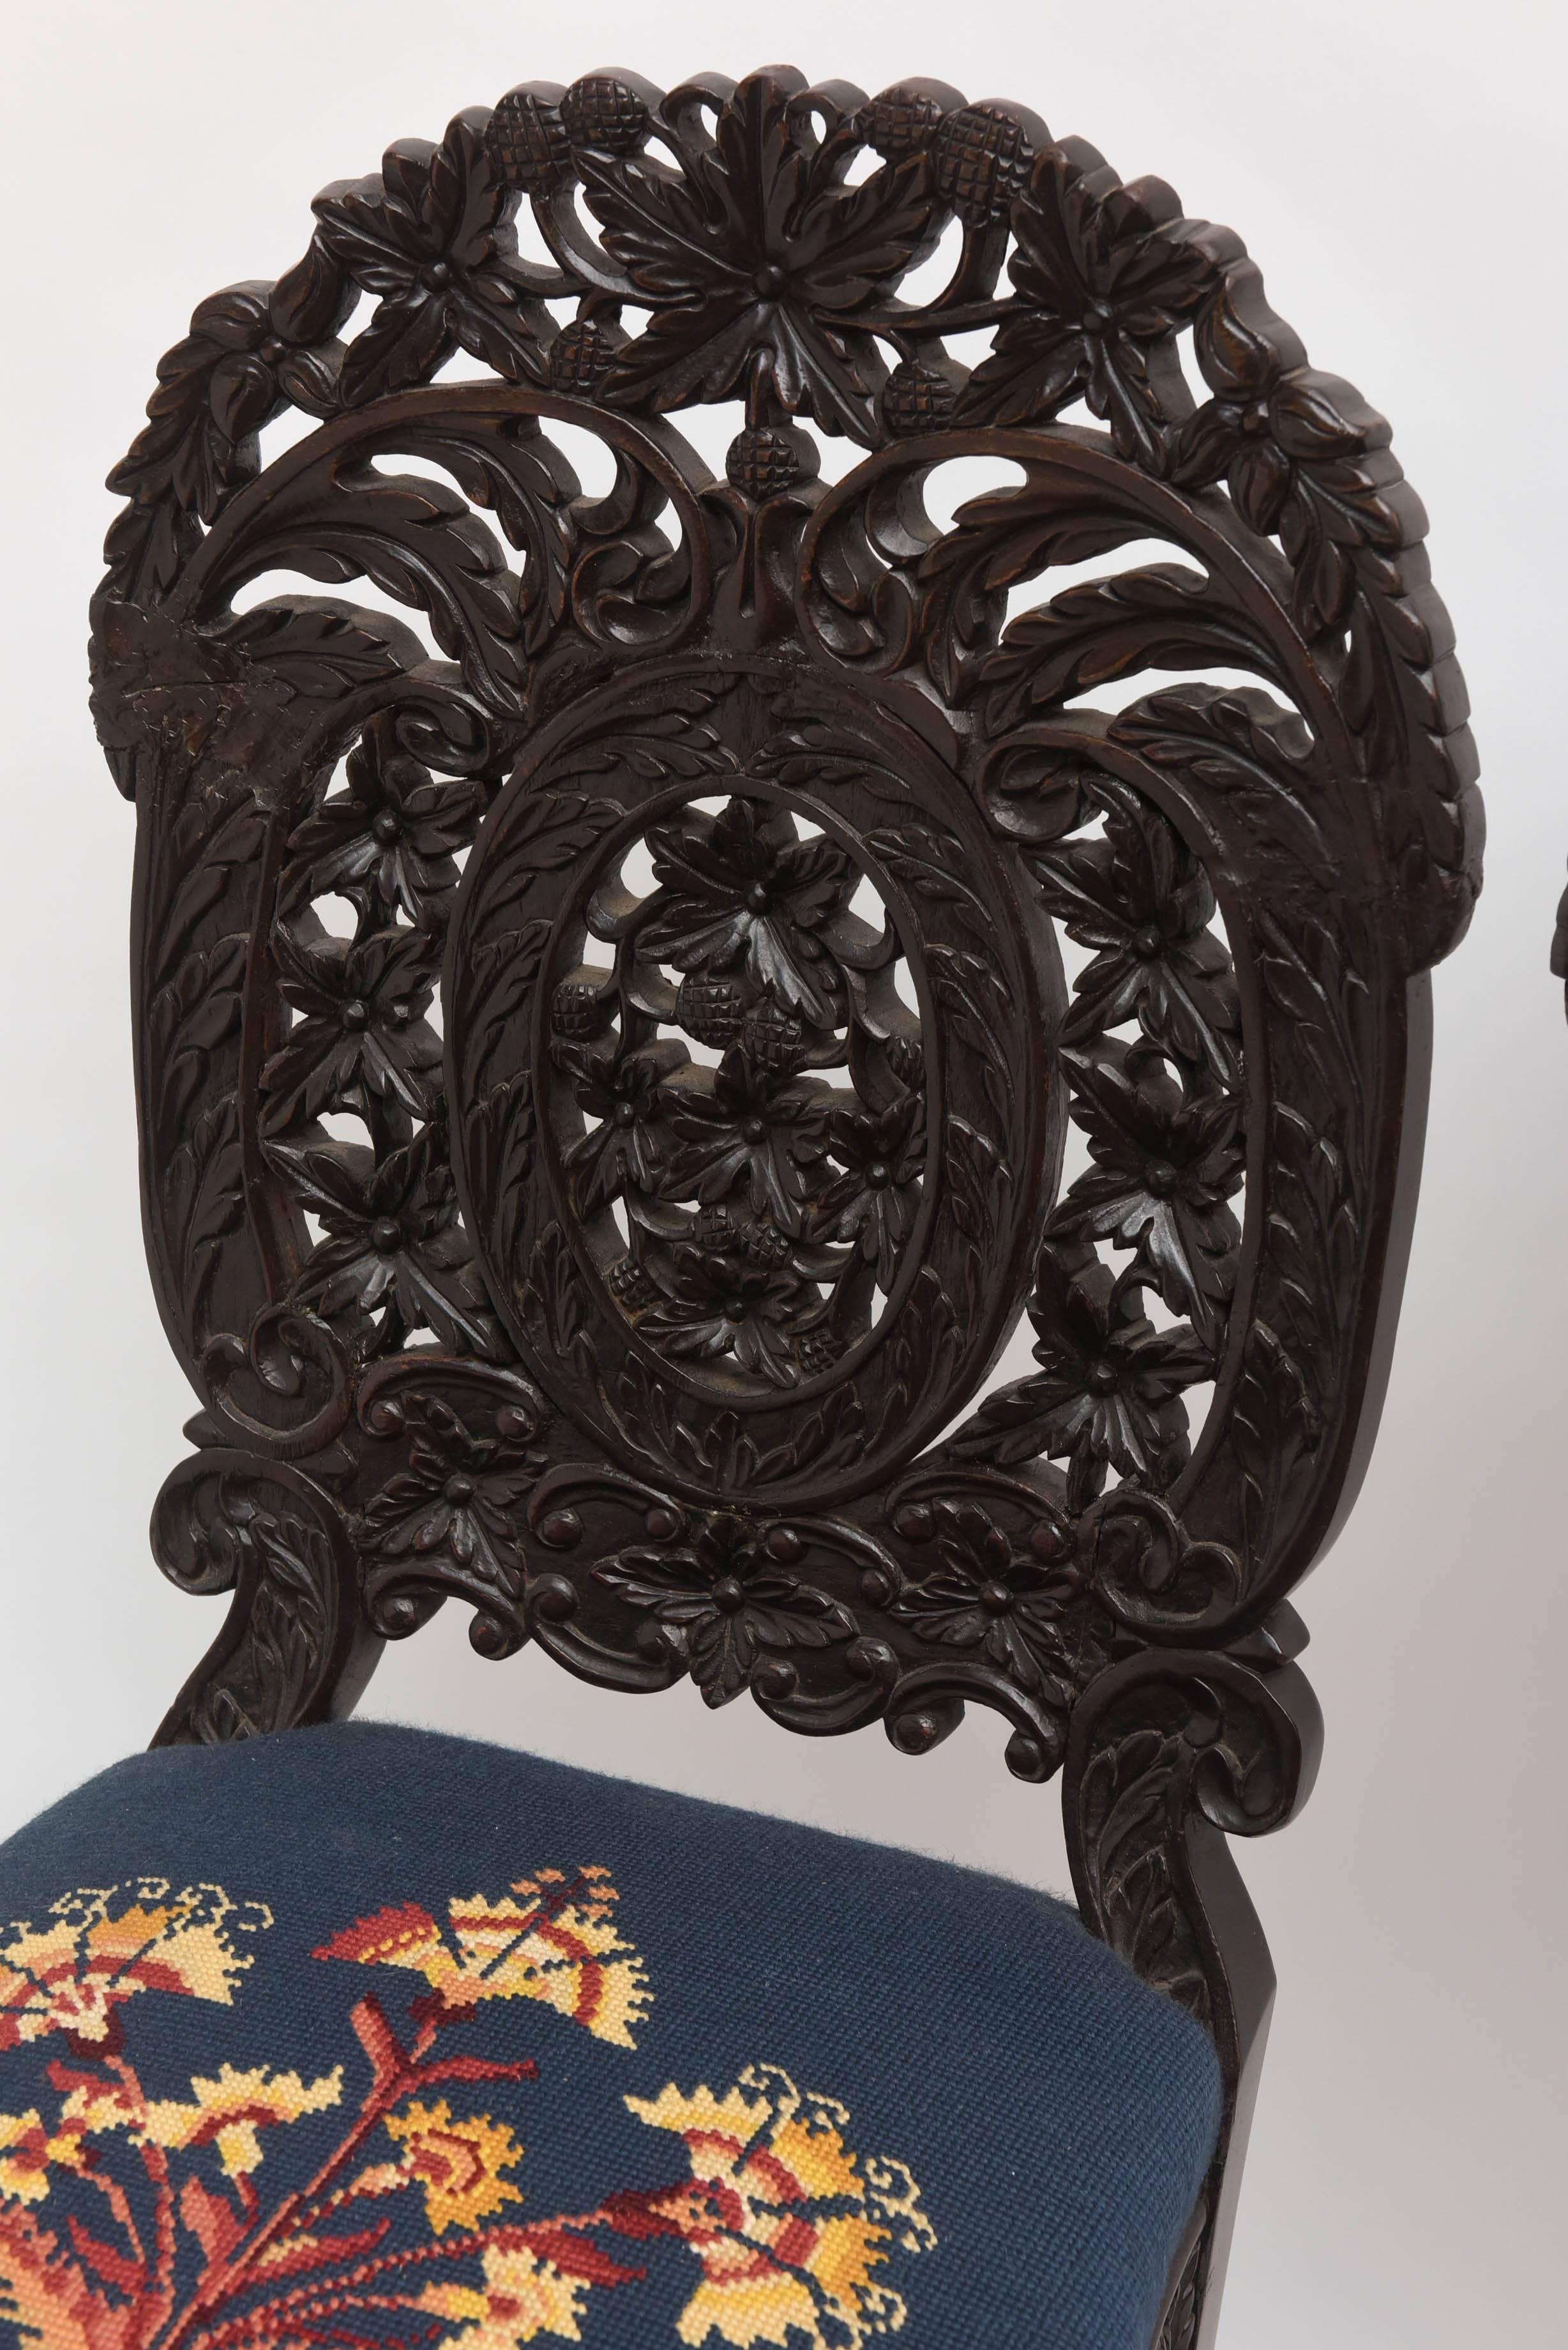 An exceptional and rare set of six with superior and intricate leaf and berry carving. Unusual form and style.